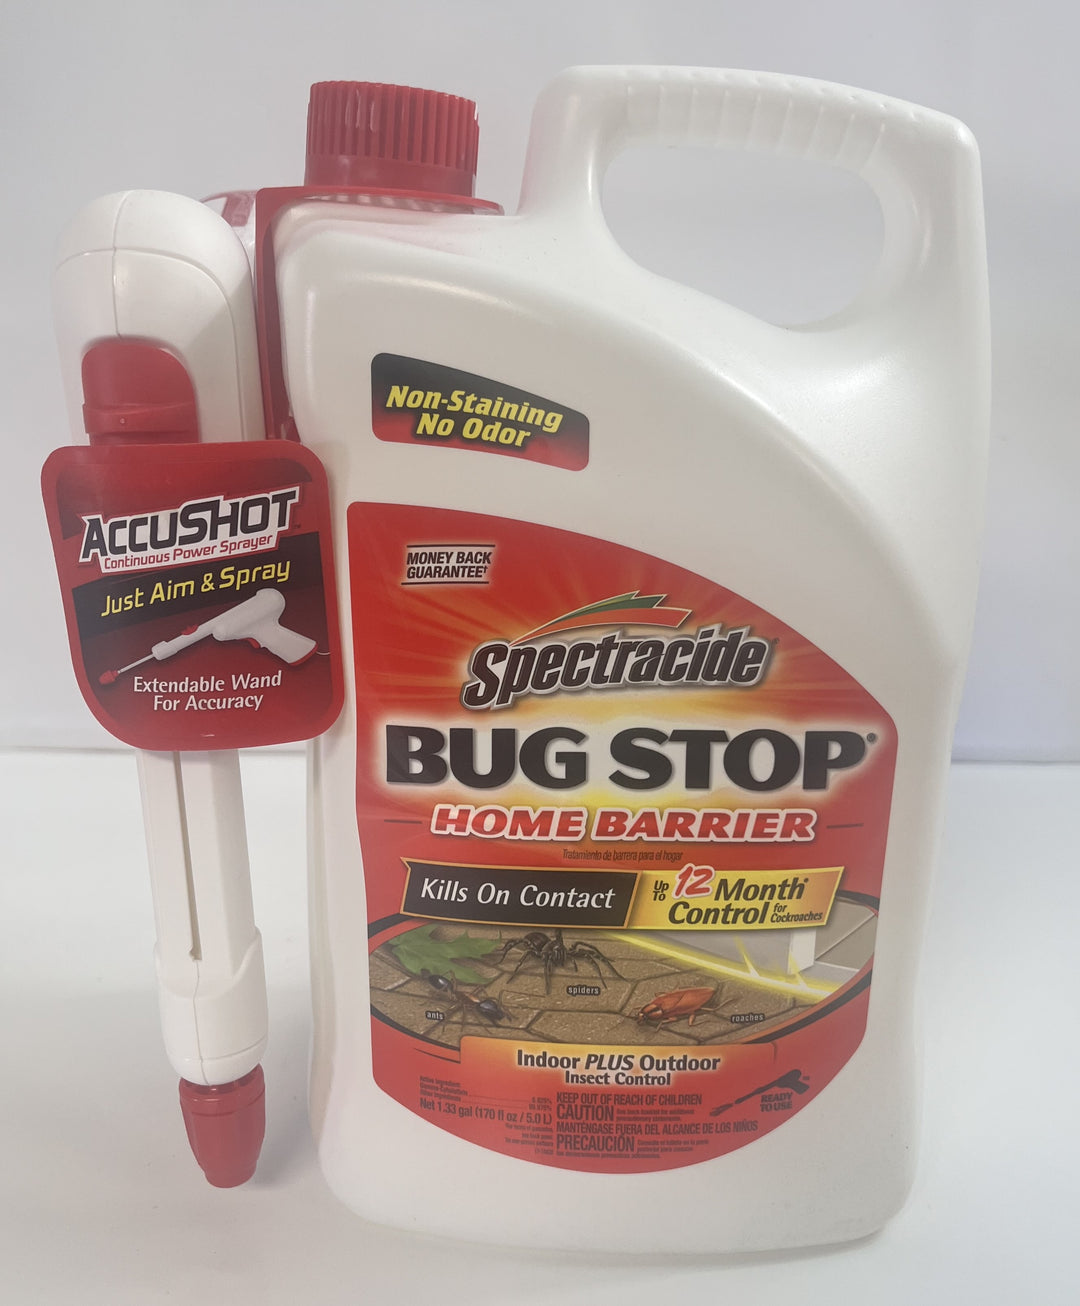 Spectracide Bug Stop Home Barrier, 1.33 gallon